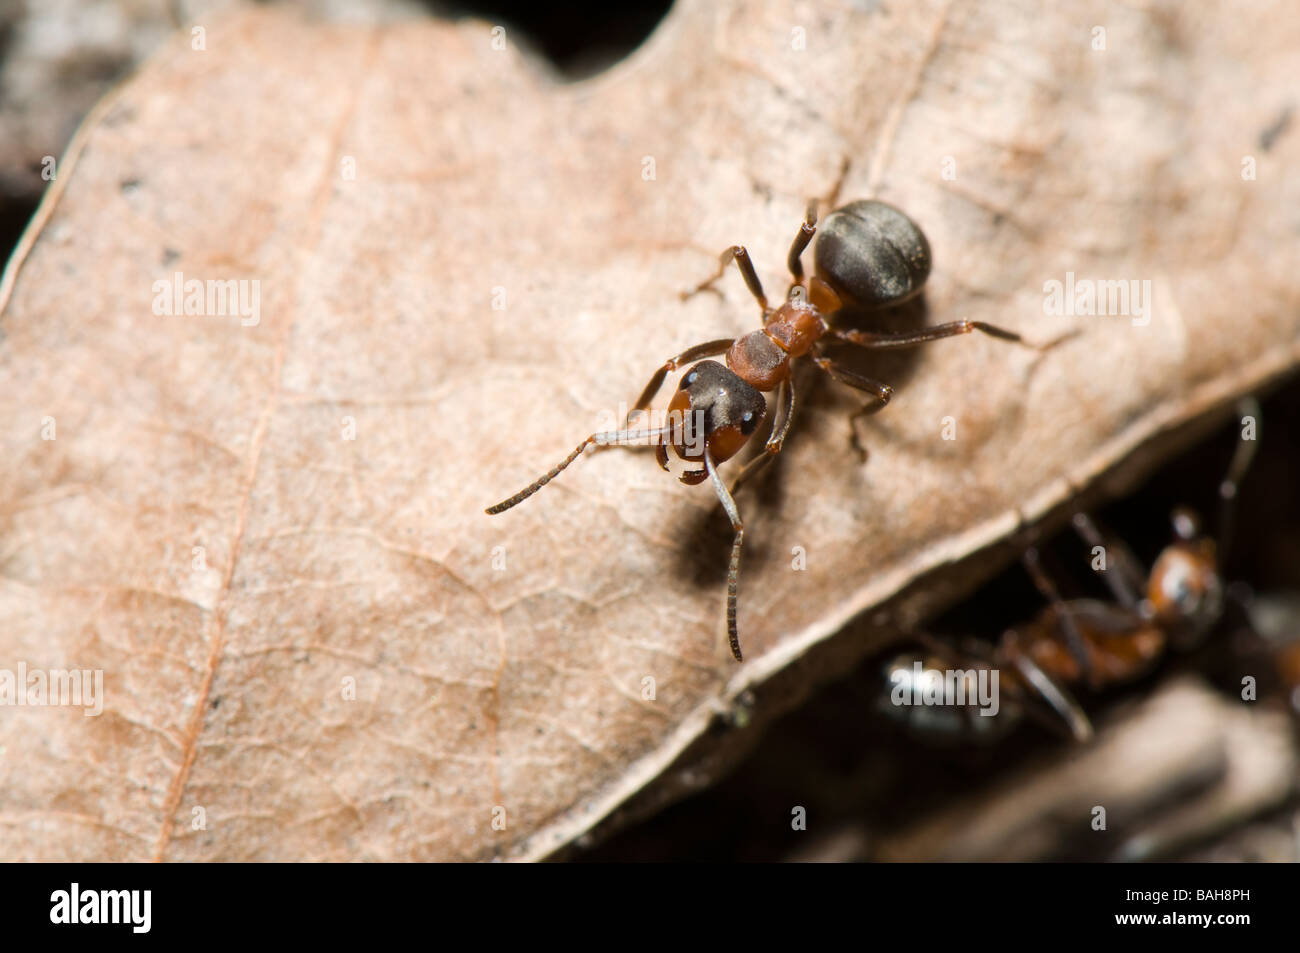 Red wood ant (Formica ant, Formica Polyctena) Stock Photo